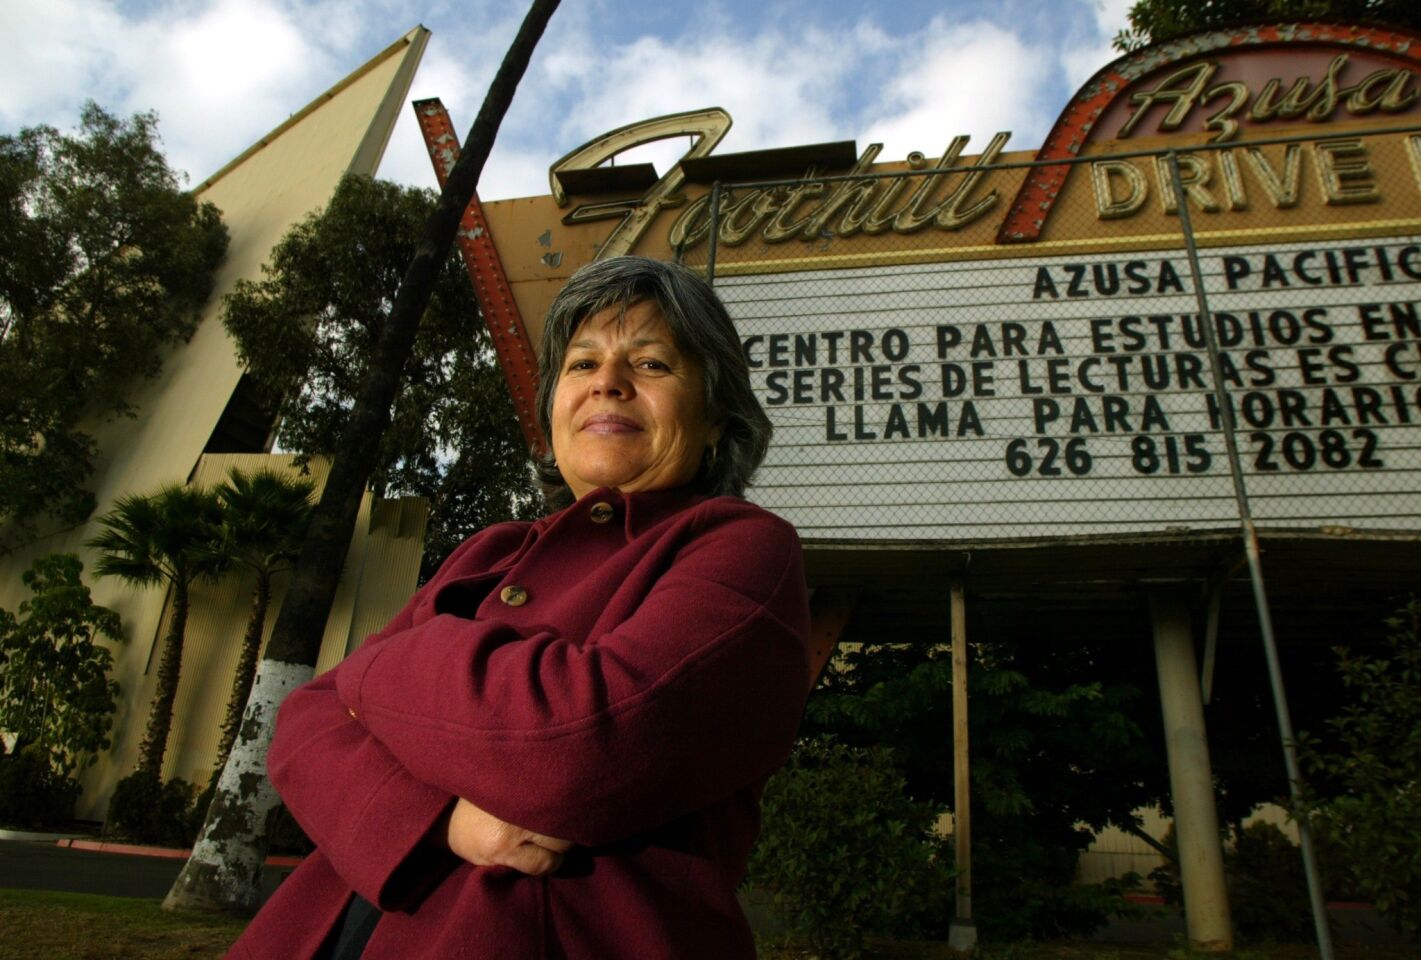 Christina Cruz-Madrid, then the mayor of Azusa, stands in front of the shuttered Azusa Foothill Drive-In.